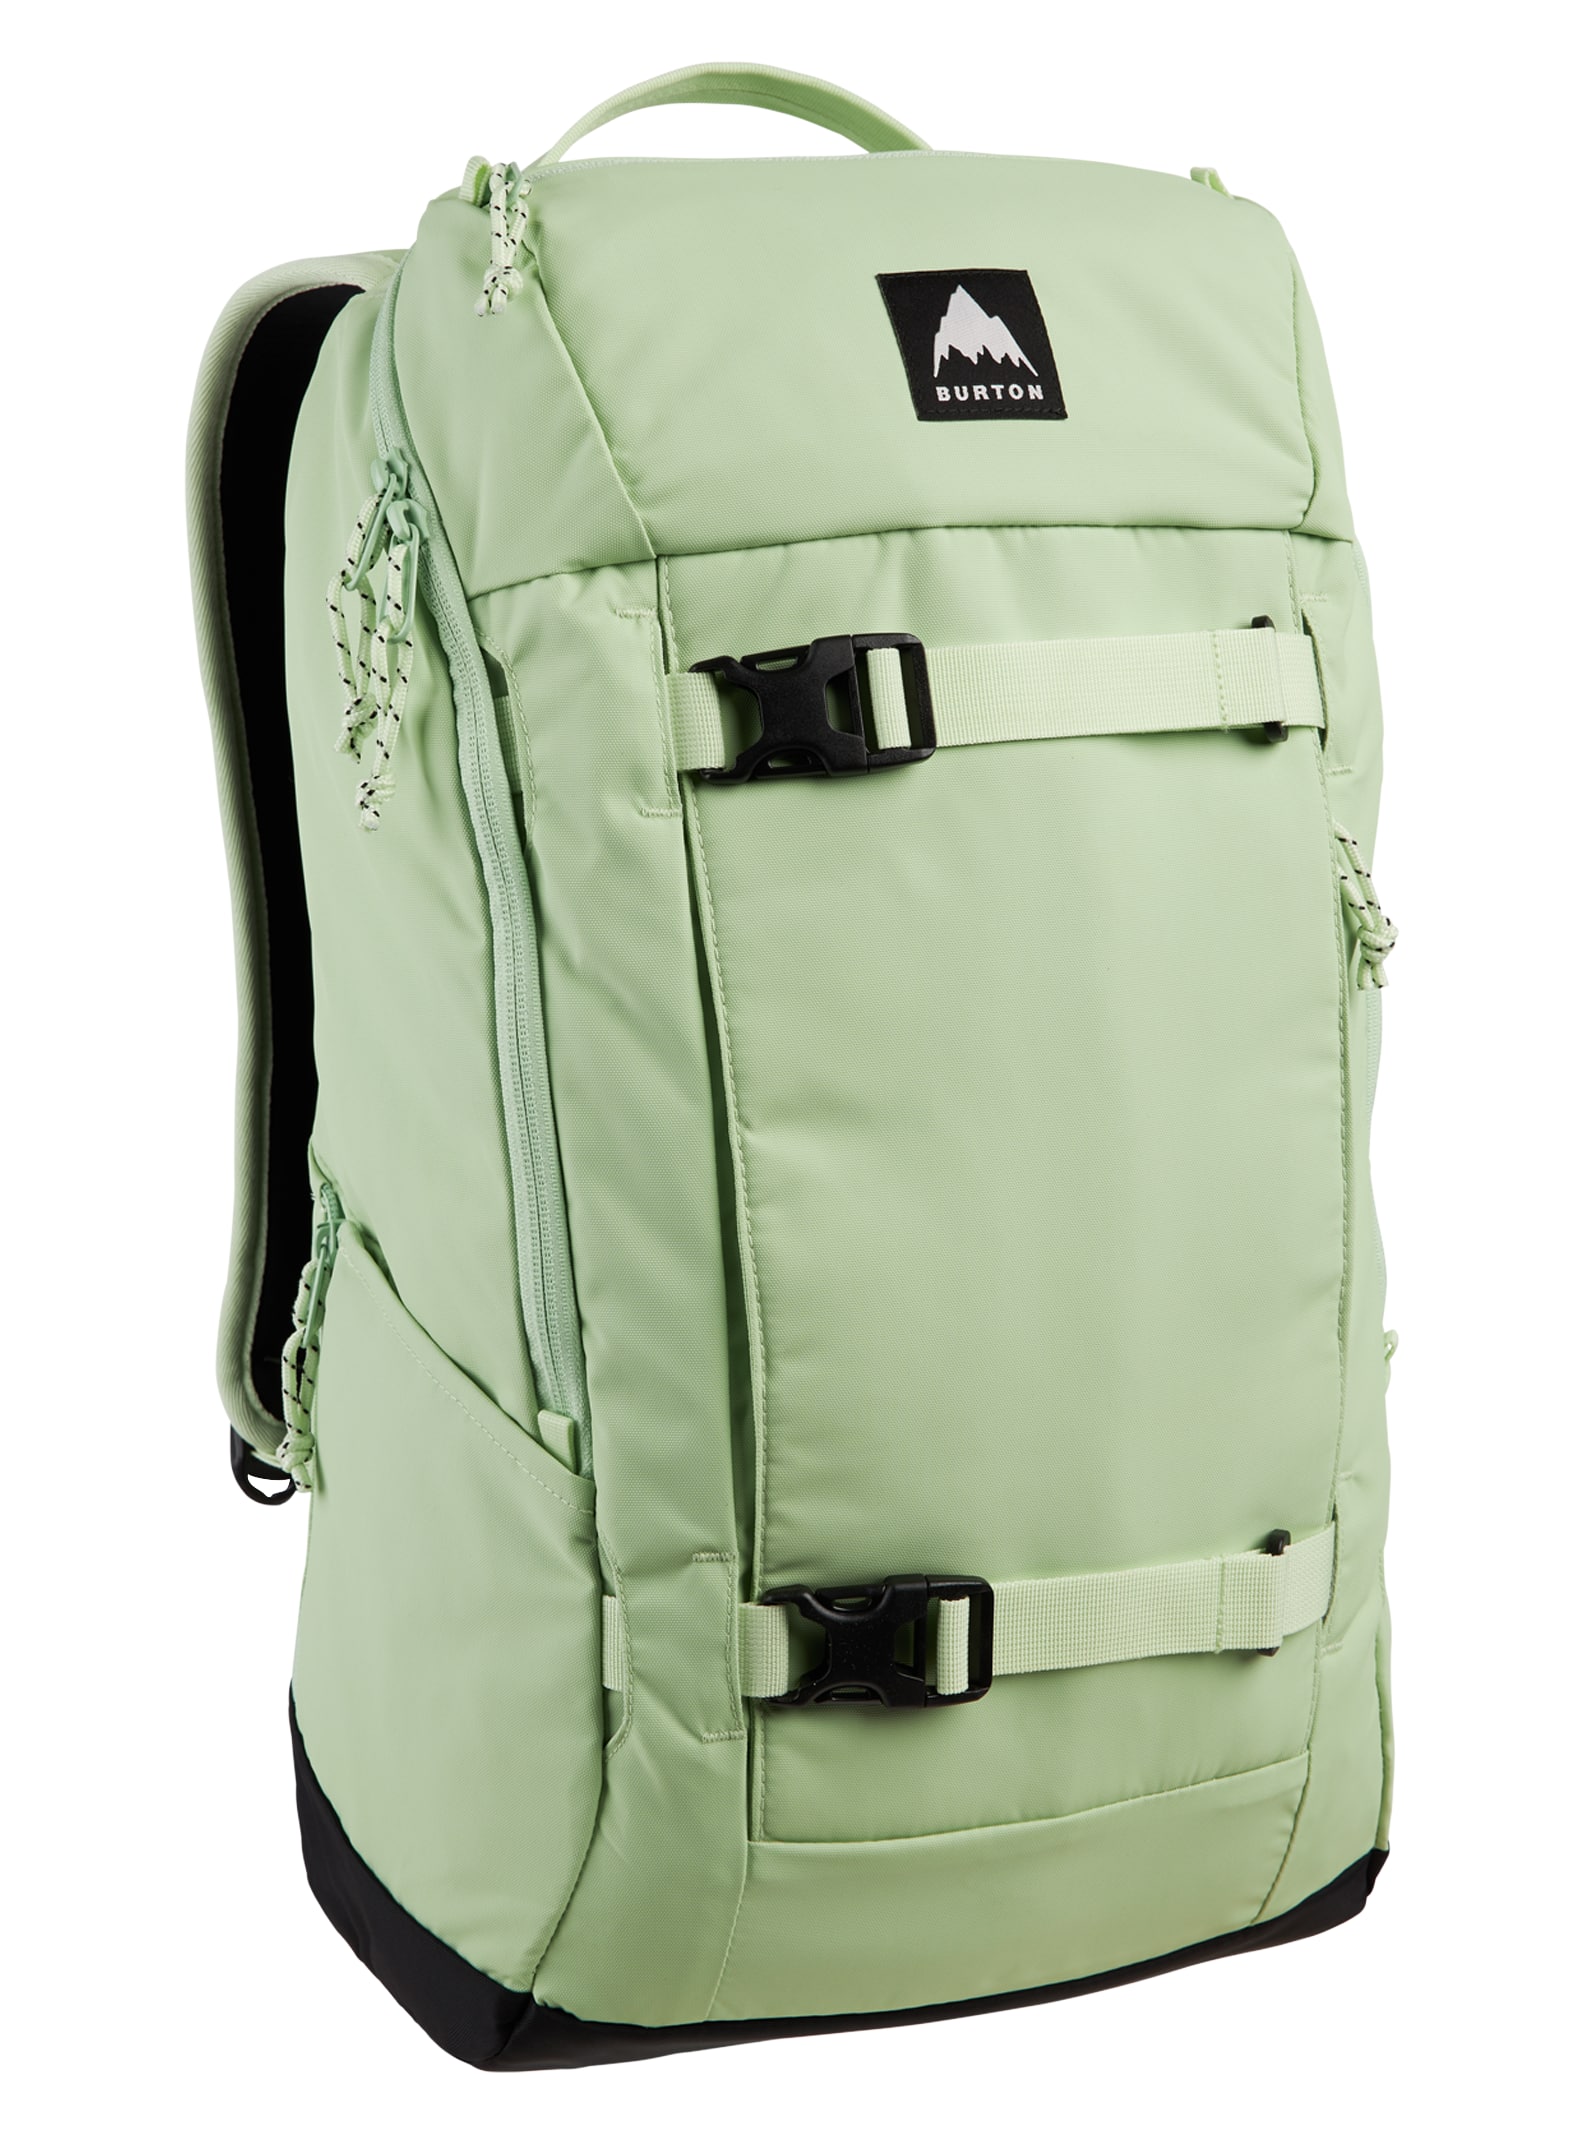 BRAND NEW!!! 27 LITERS COLORS AVAILABLE SIZE BURTON KILO PACK - 